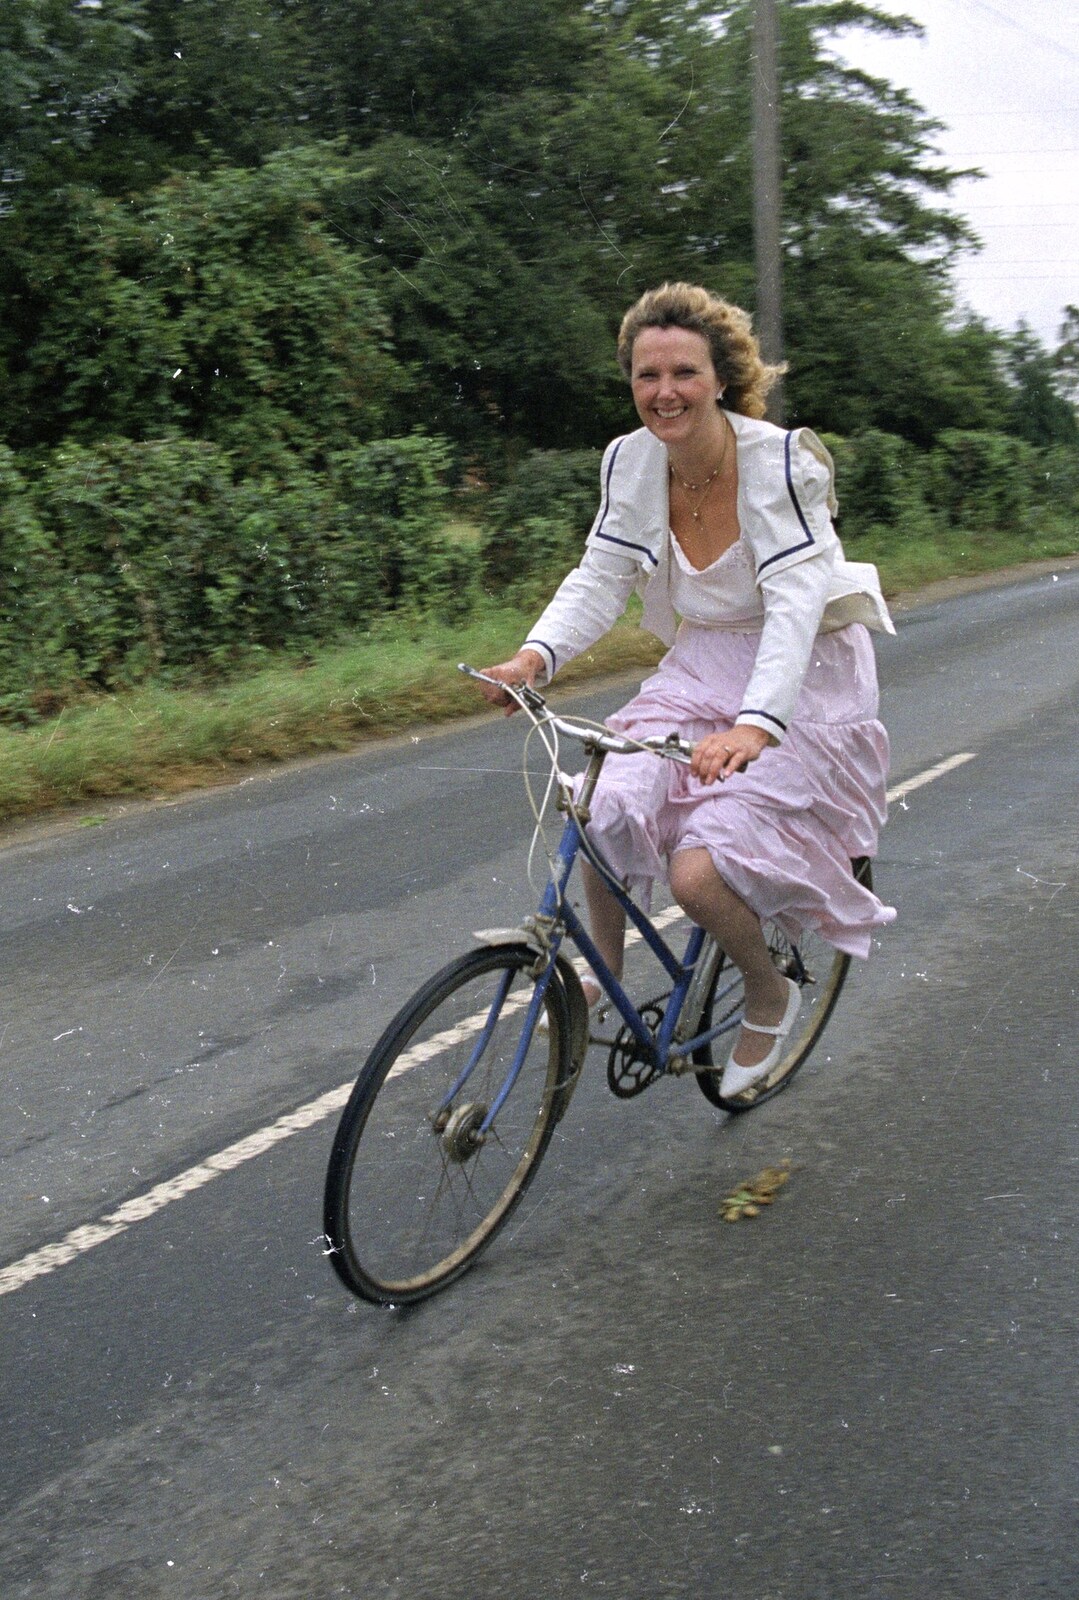 Elteb speeds along from A Bike Ride to Redgrave, Suffolk - 11th August 1990